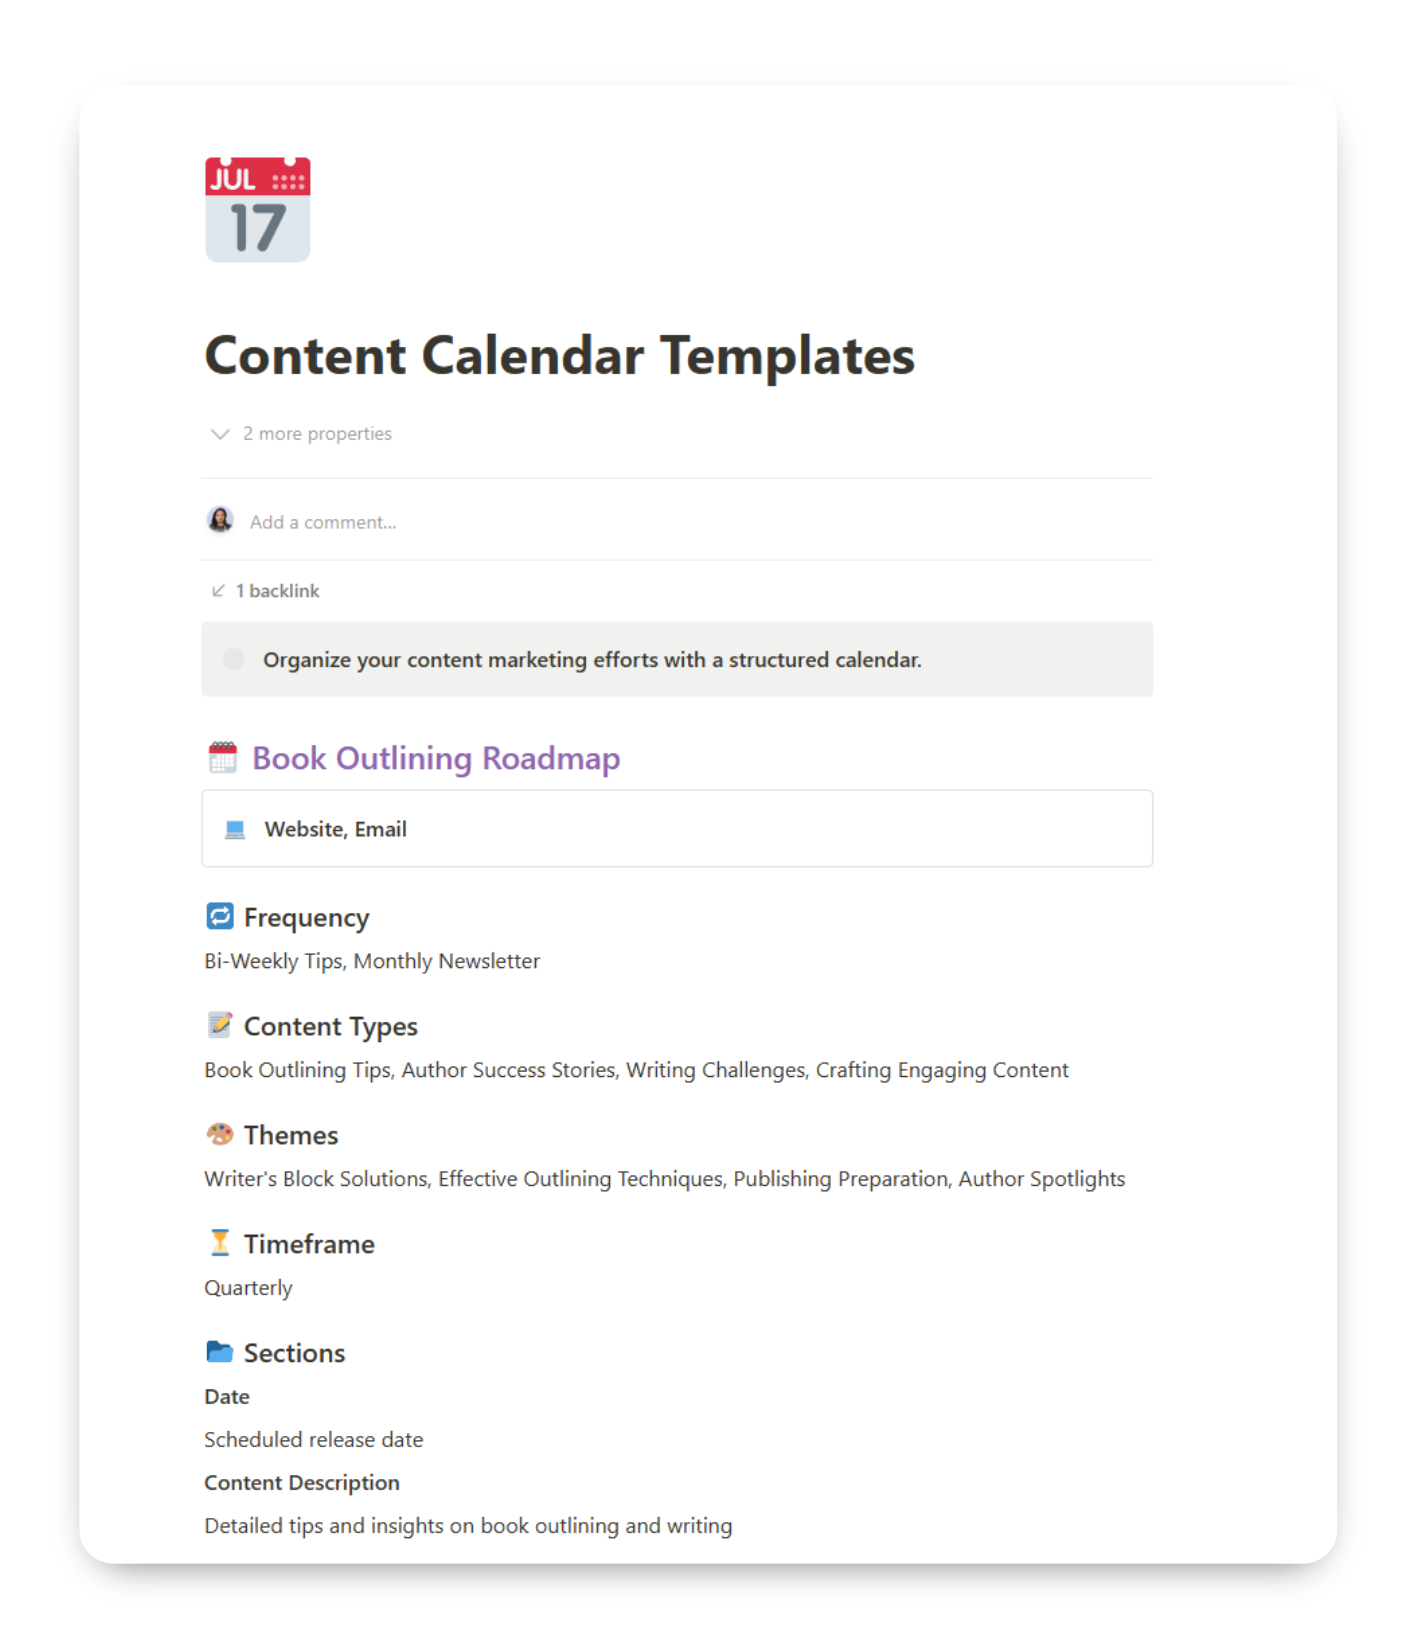 A detailed screenshot of the 'Content Calendar Templates' page on BundlyAI, showing how to plan and organize content effectively across different platforms.